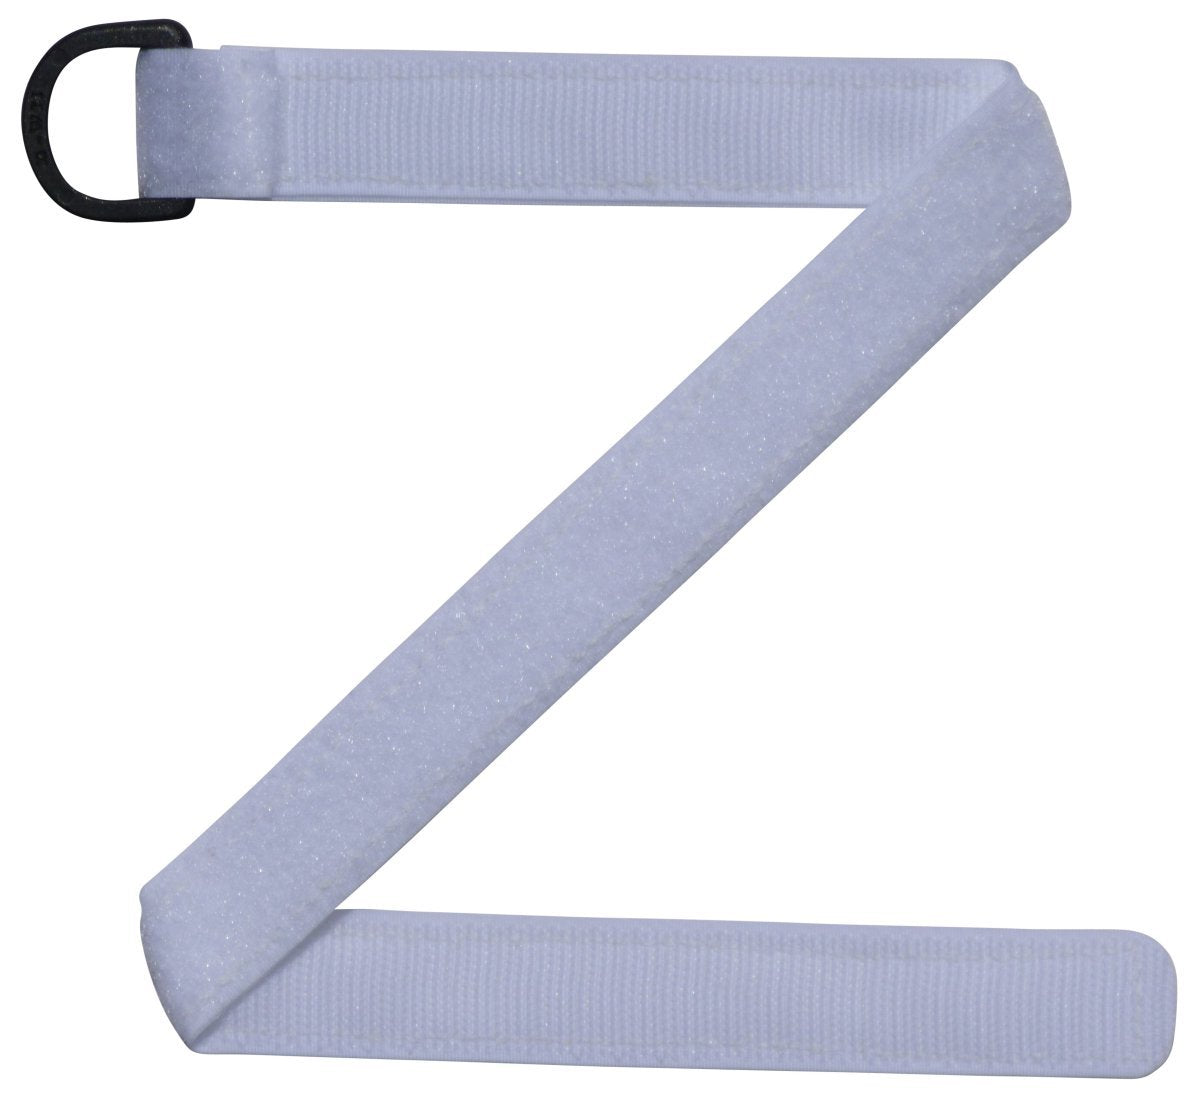 Benristraps 25mm Hook and Loop Strap with D Ring (Pair) in white